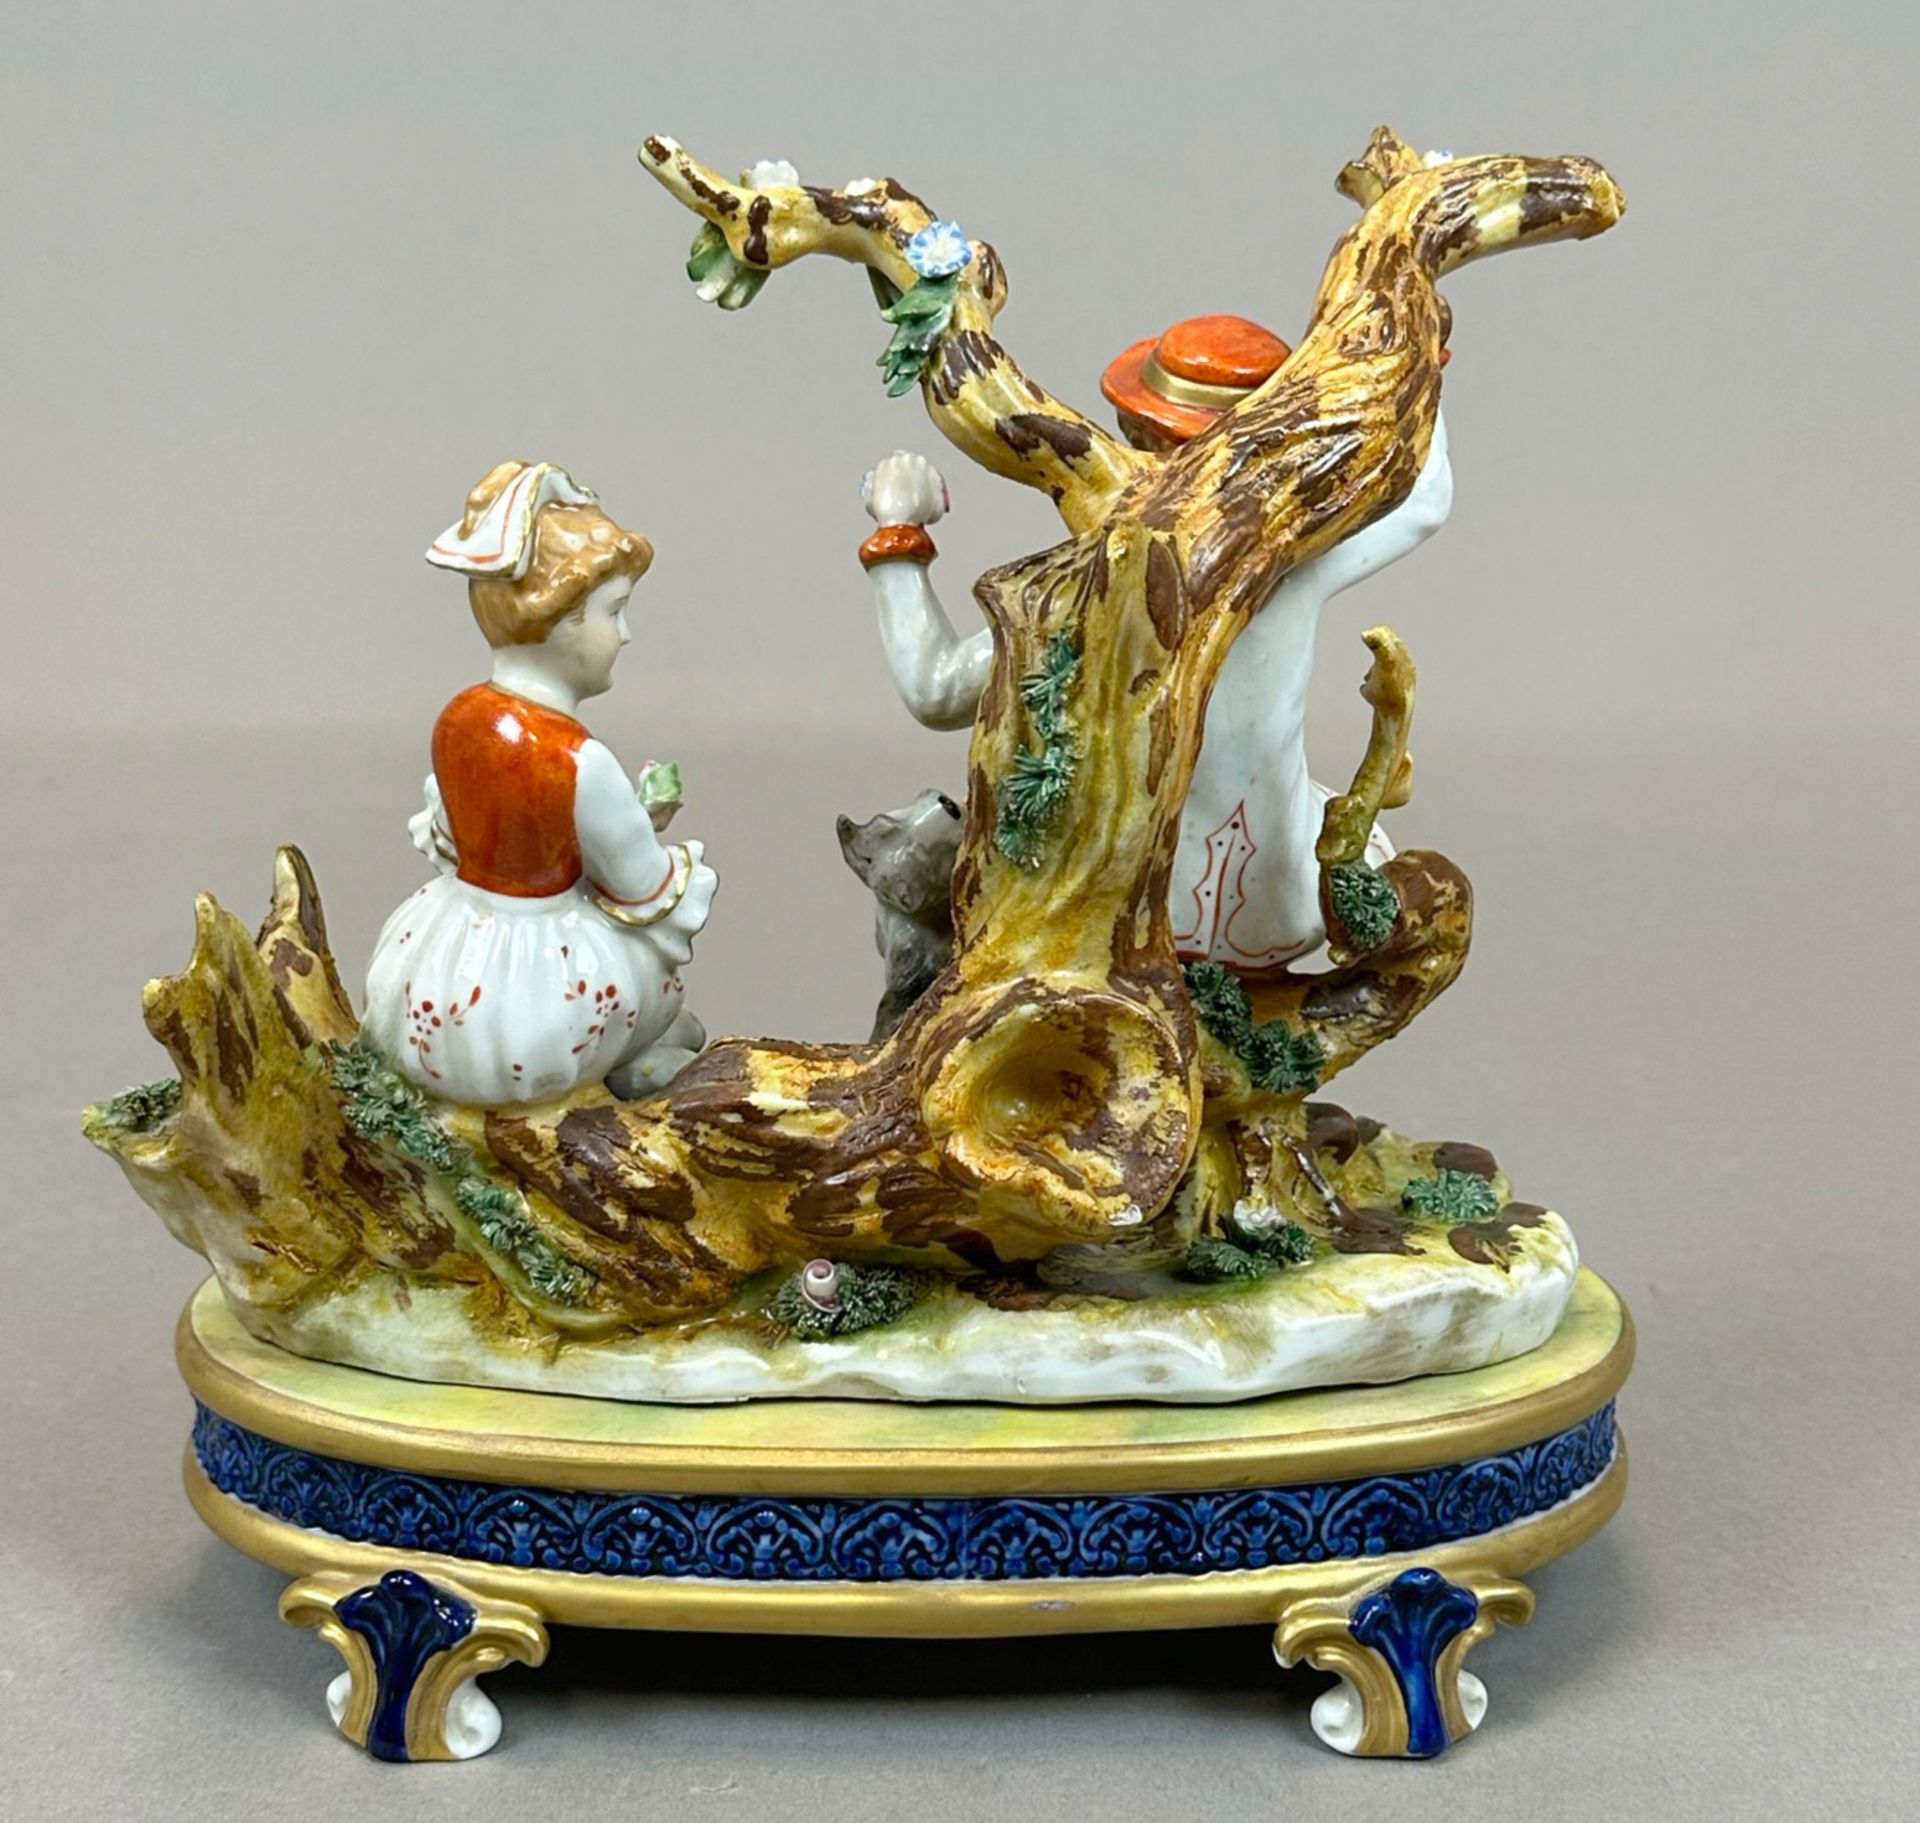 Group of figures. "Lovers with dog". Edmé Samson. France. 2nd half 19th century. - Image 3 of 8